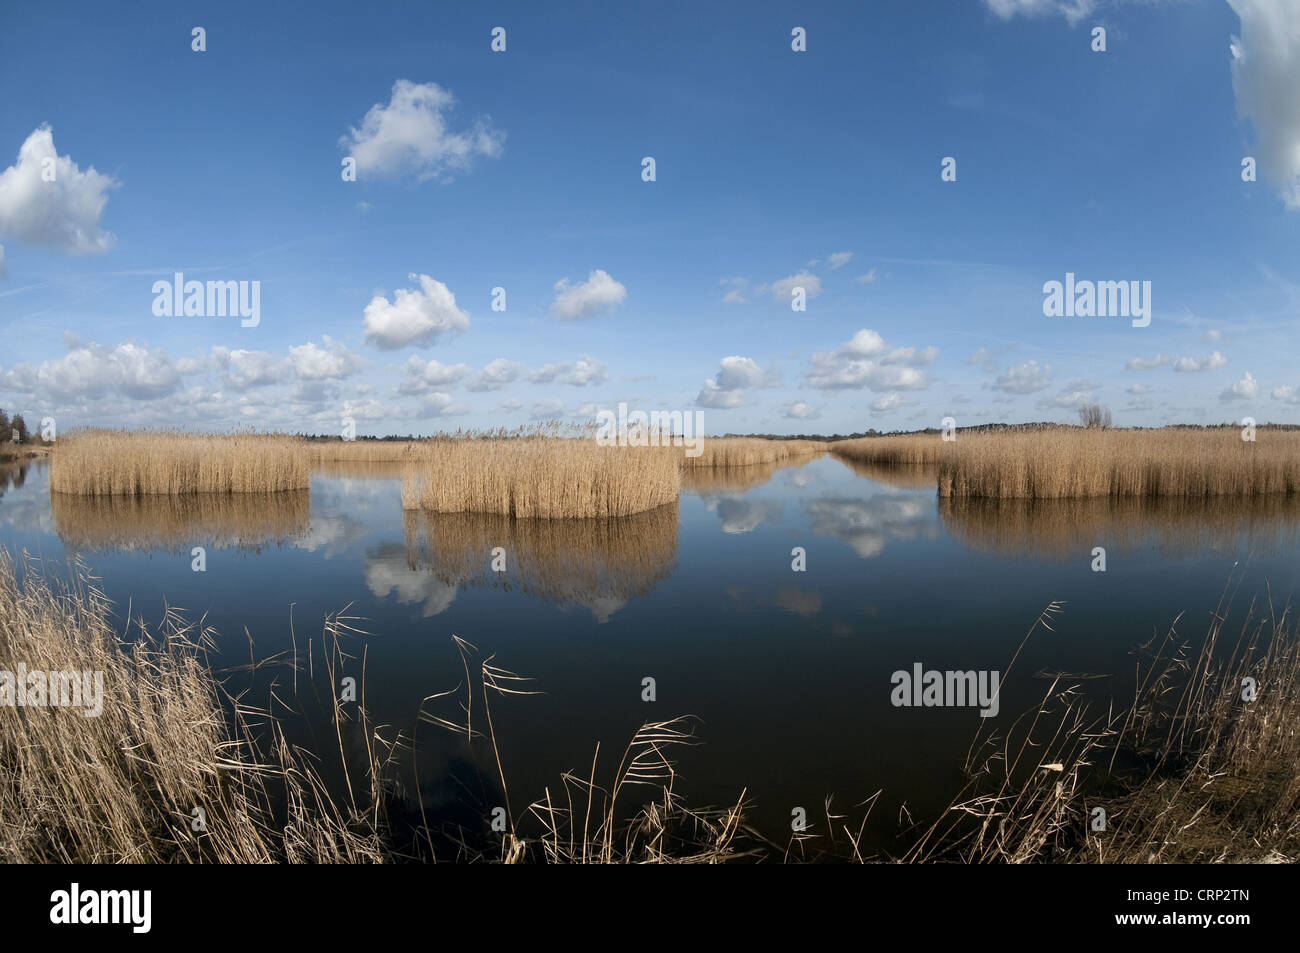 View of open water and reedbed habitat, Strumpshaw Fen RSPB Reserve, River Yare, The Broads N.P., Norfolk, England, february Stock Photo